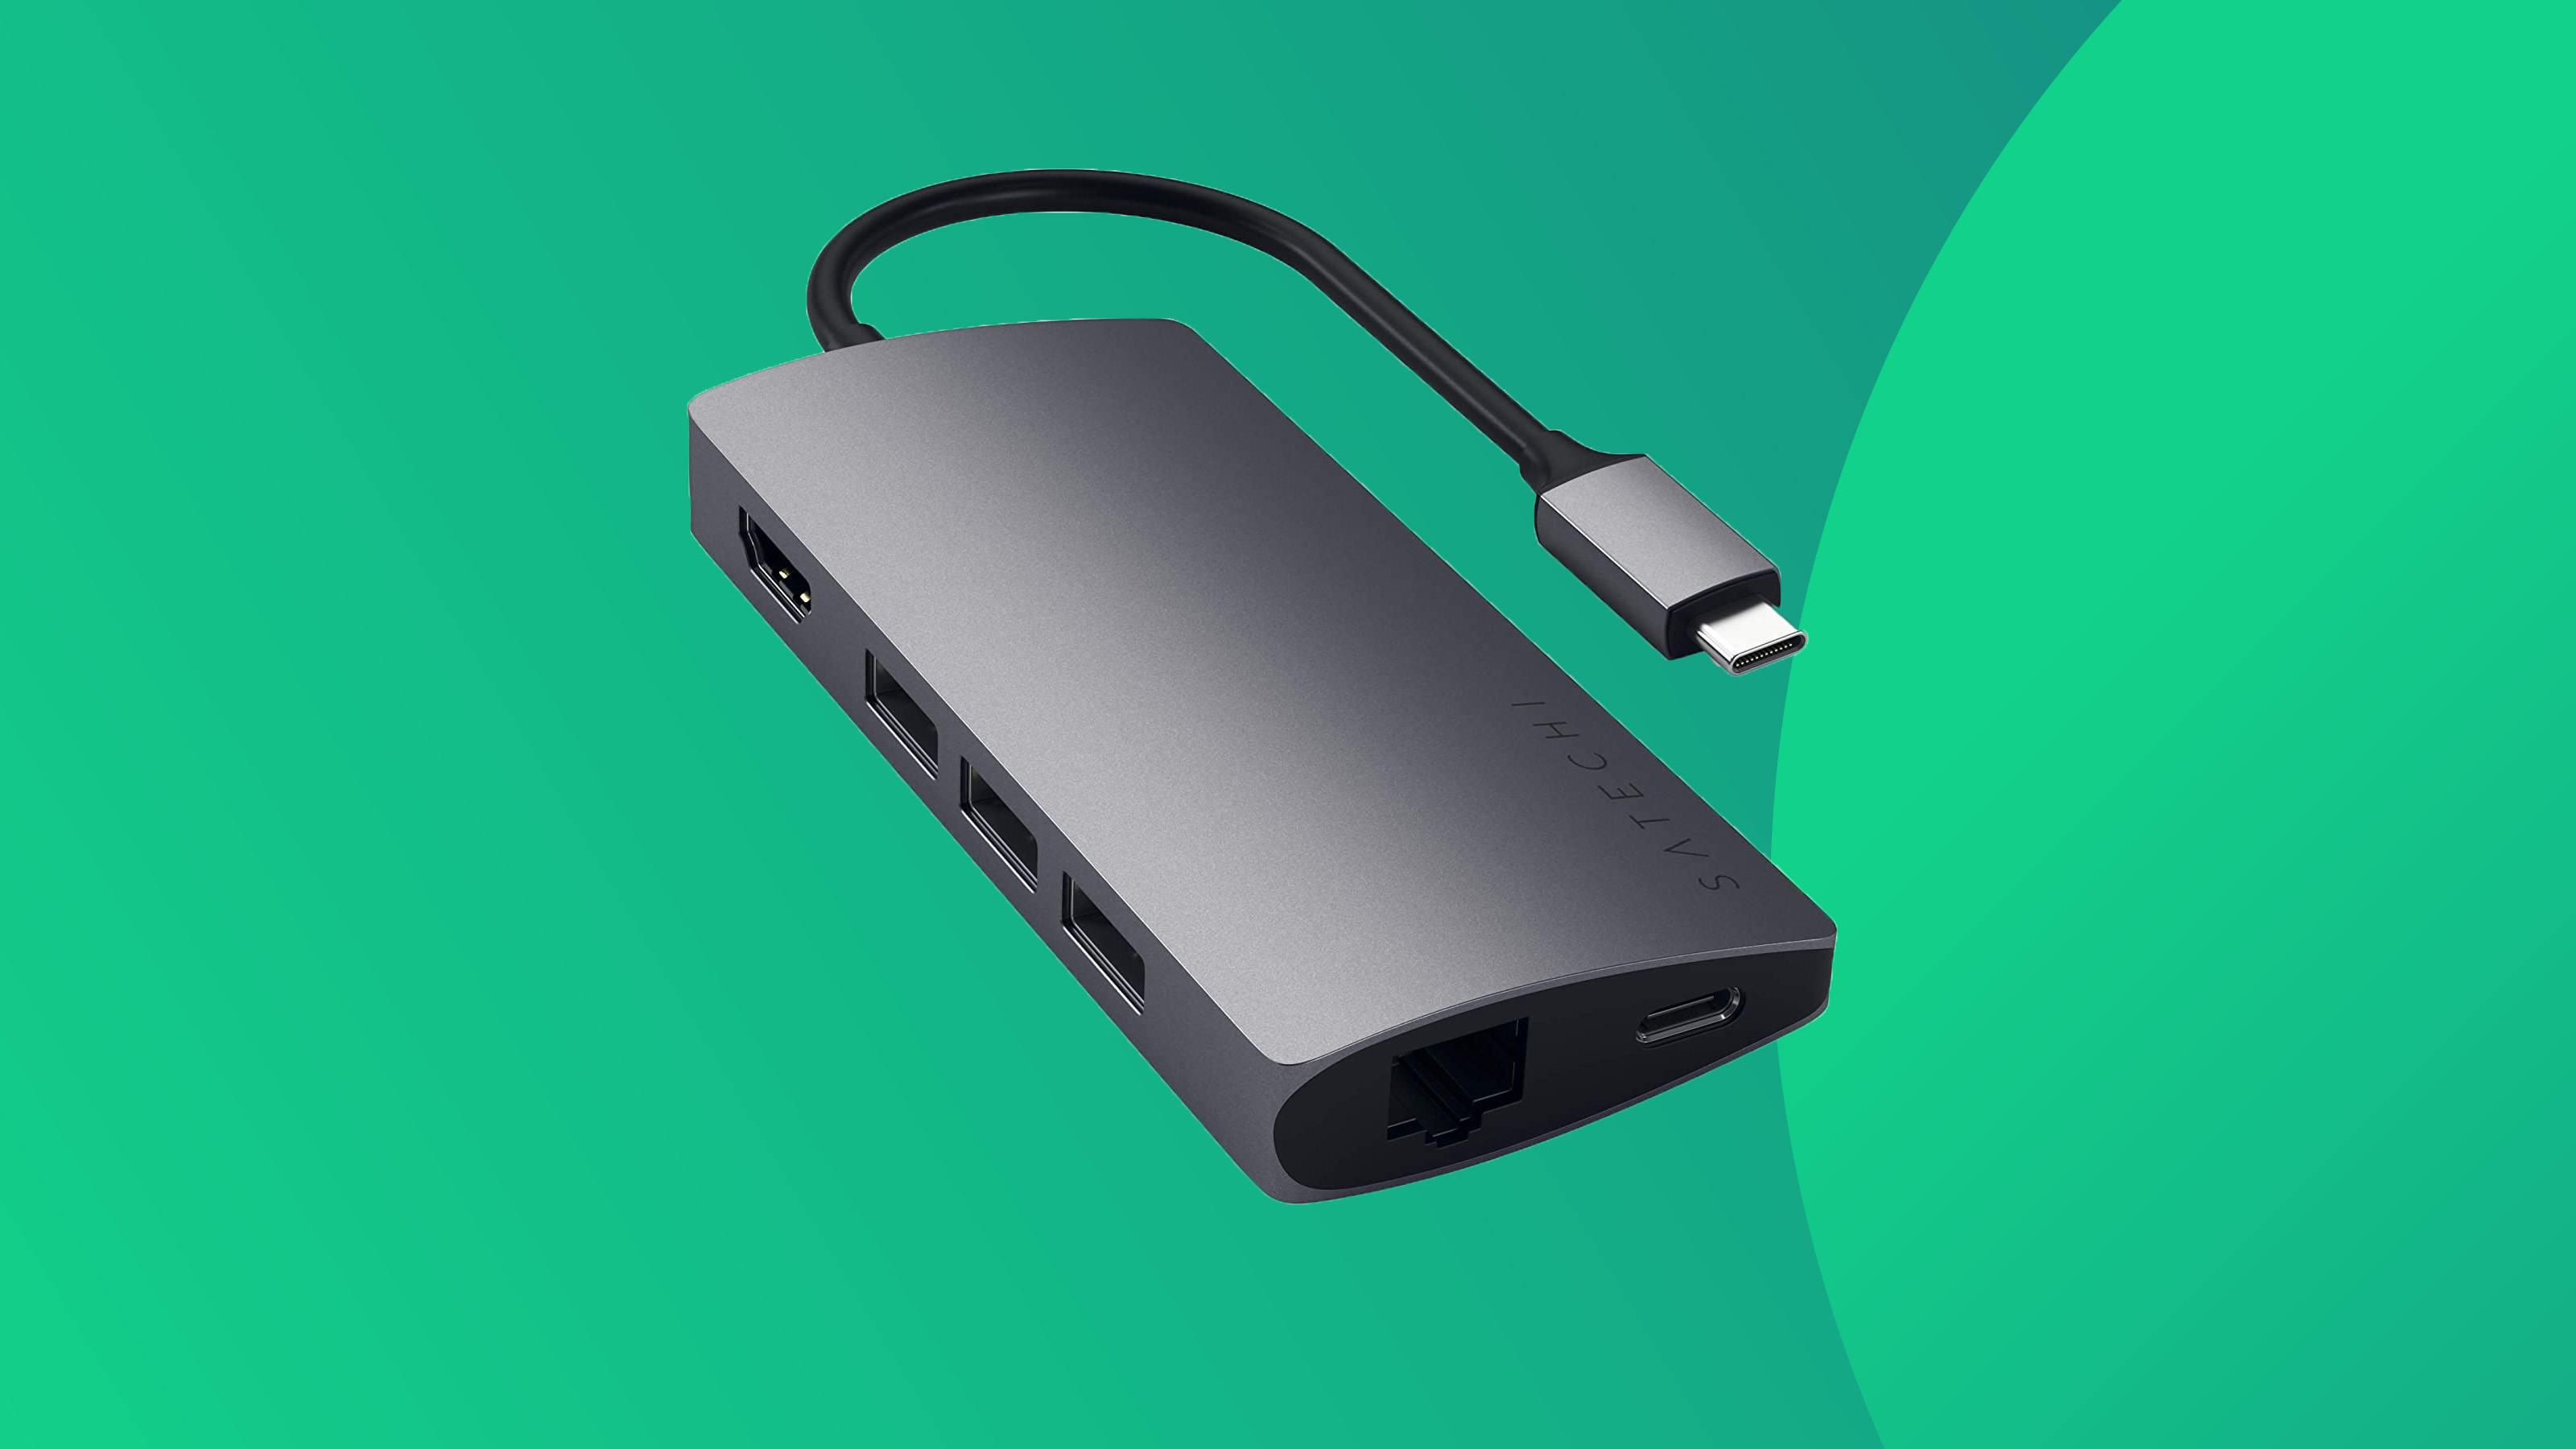 A product shot of the Satechi Multi-port adaptor V2 on a green background